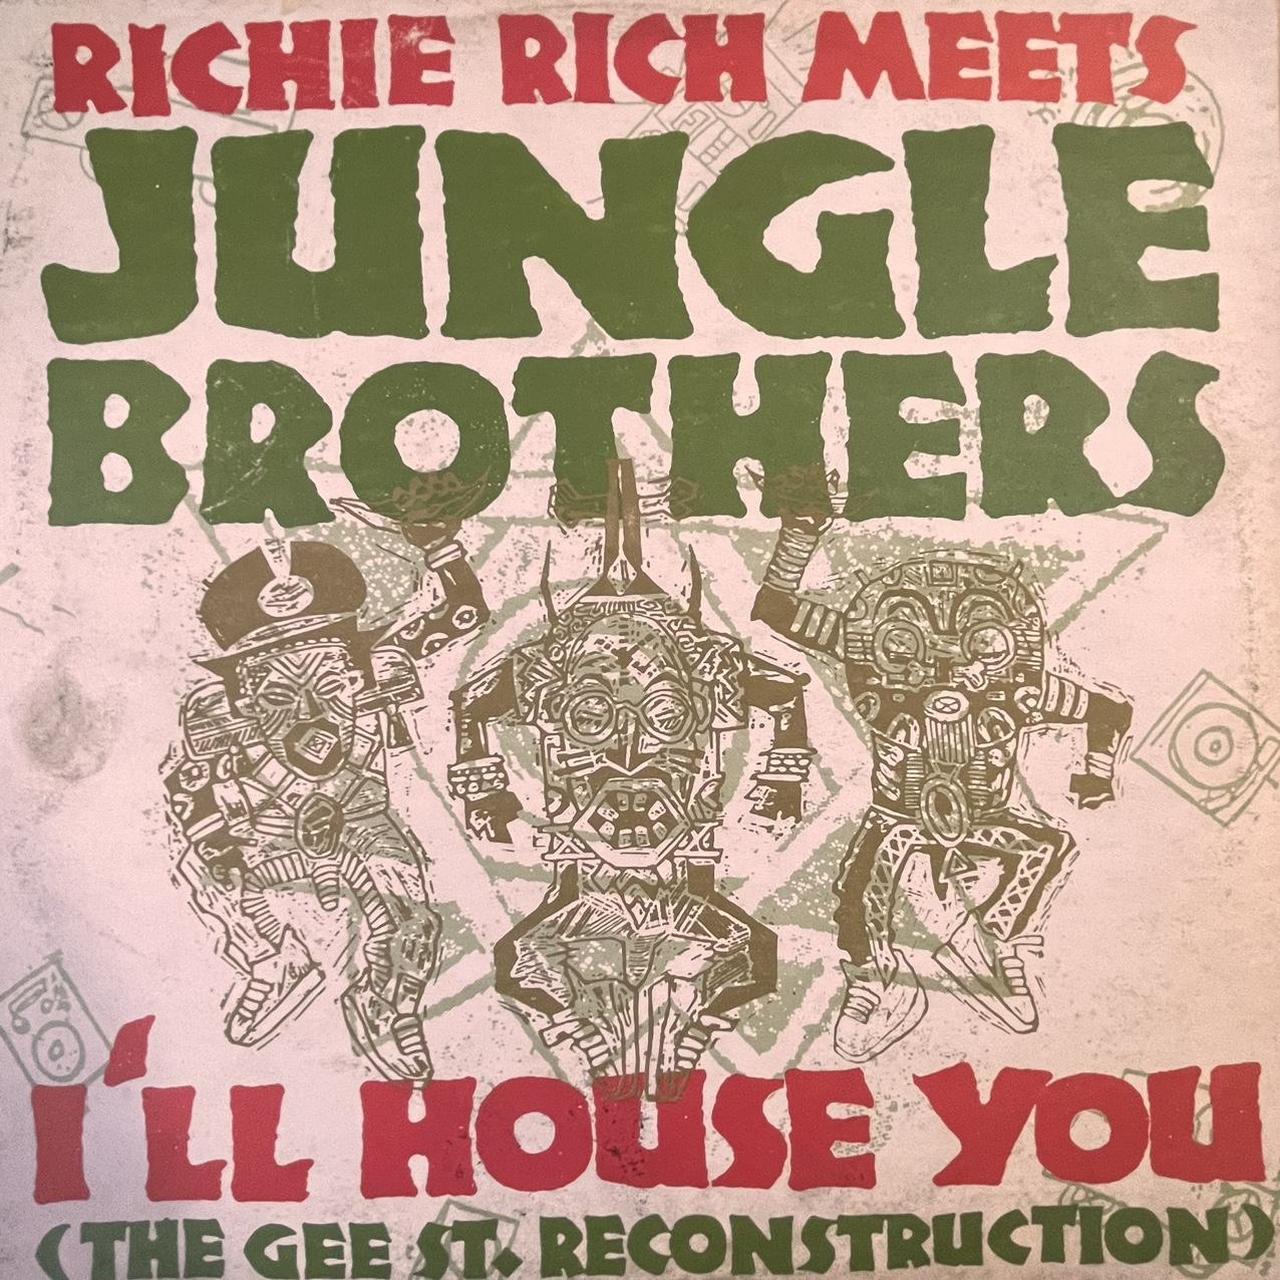 Richie Rich Meets Jungle Brothers “Ill House You” 2 Version 12inch Vinyl